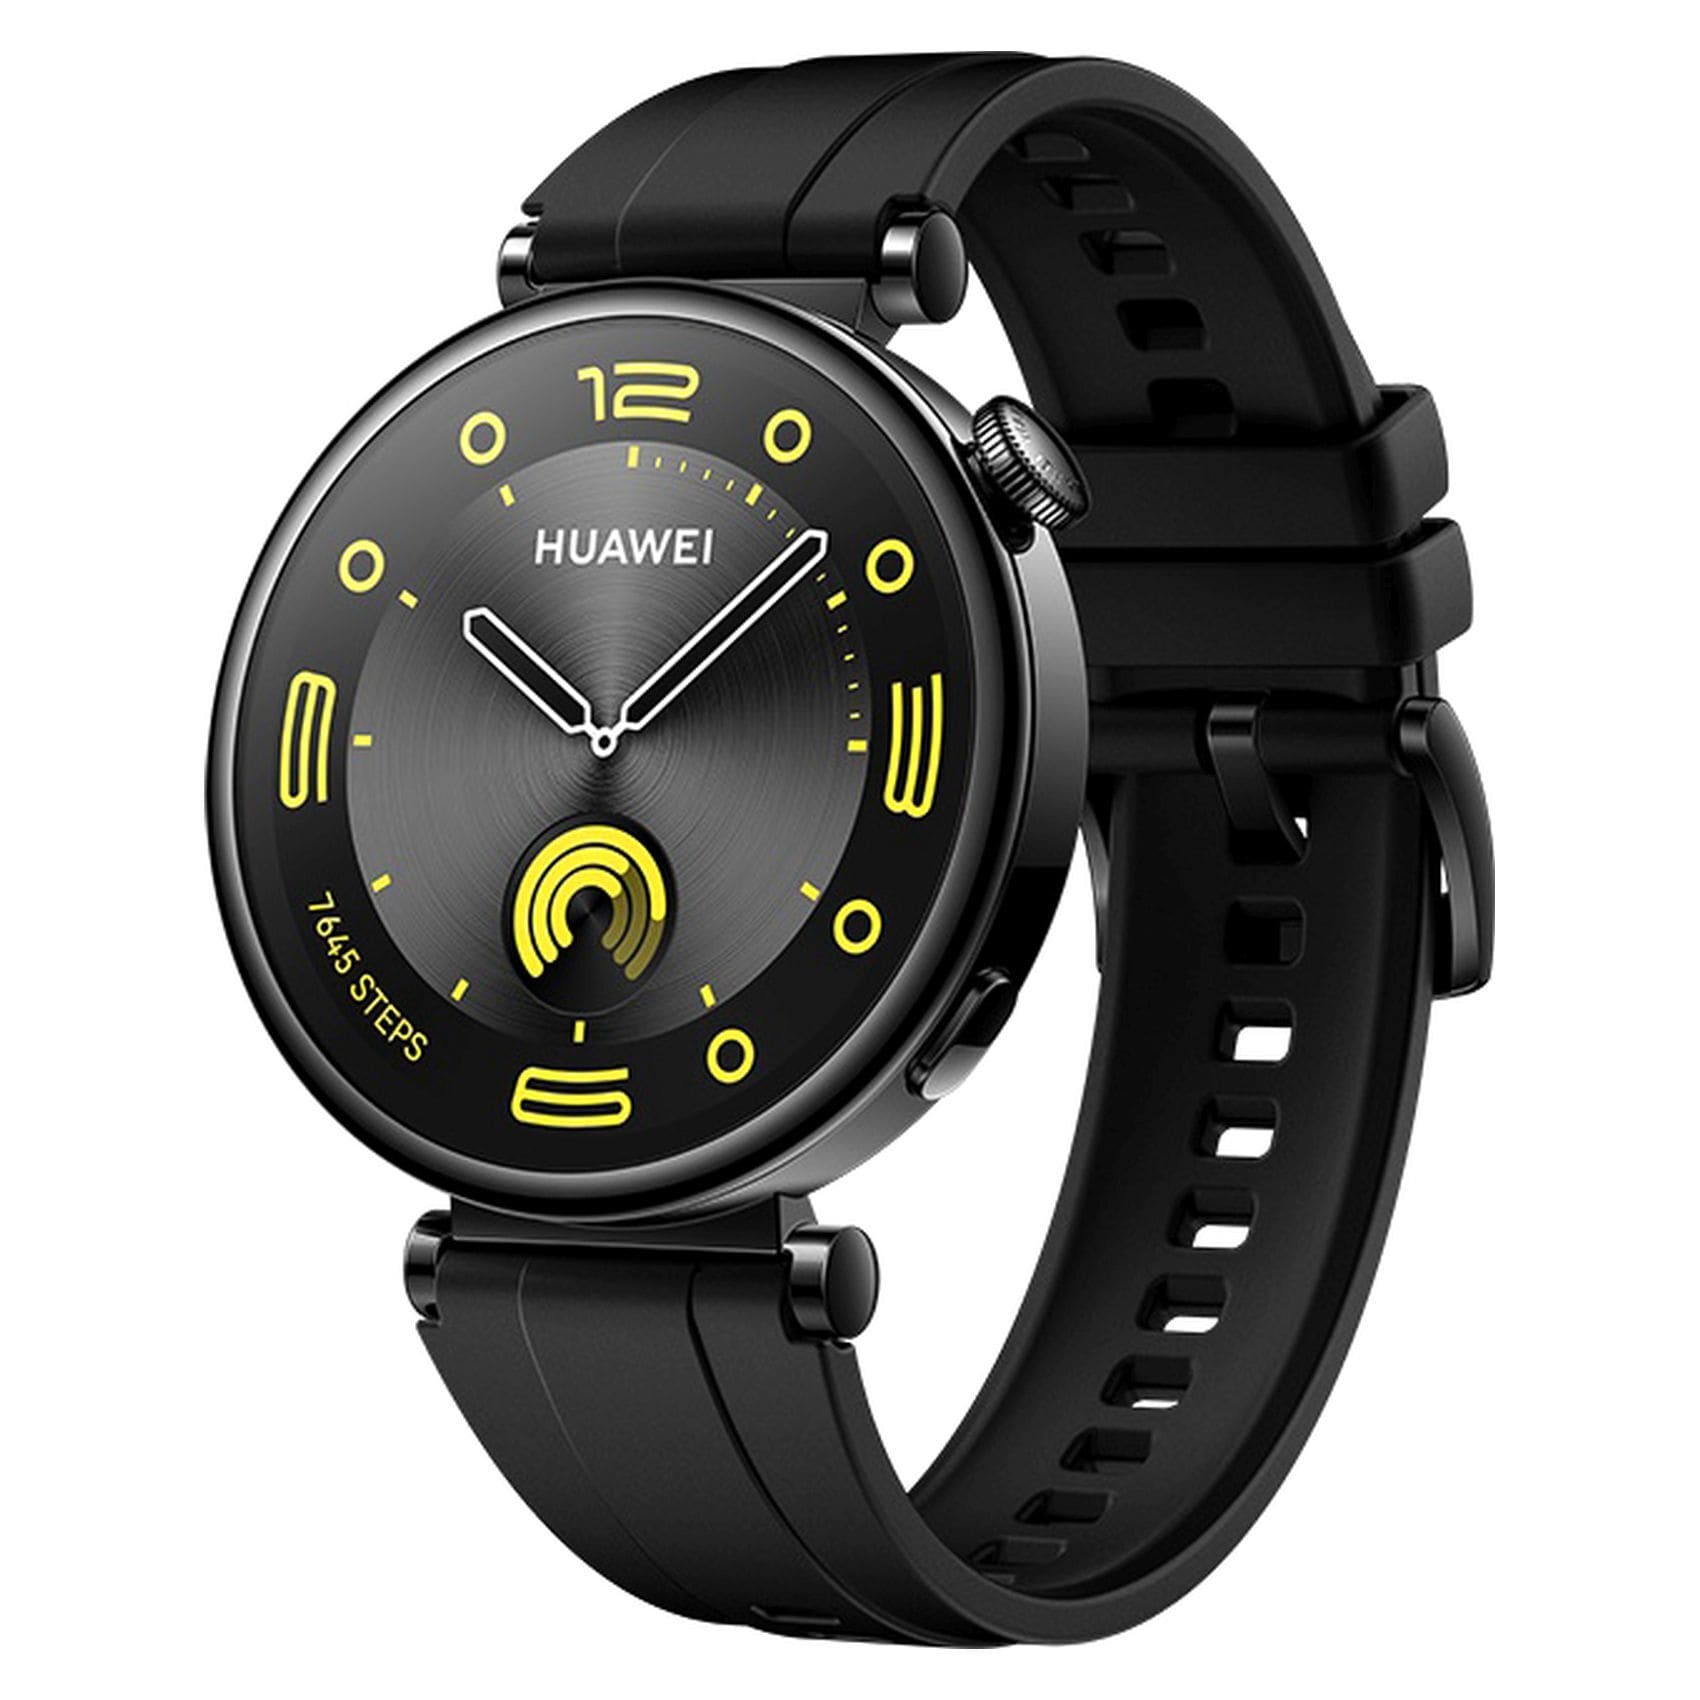 Buy Huawei GT4 Smartwatch GPS Aurora White 41mm Online - Shop Smartphones,  Tablets & Wearables on Carrefour UAE